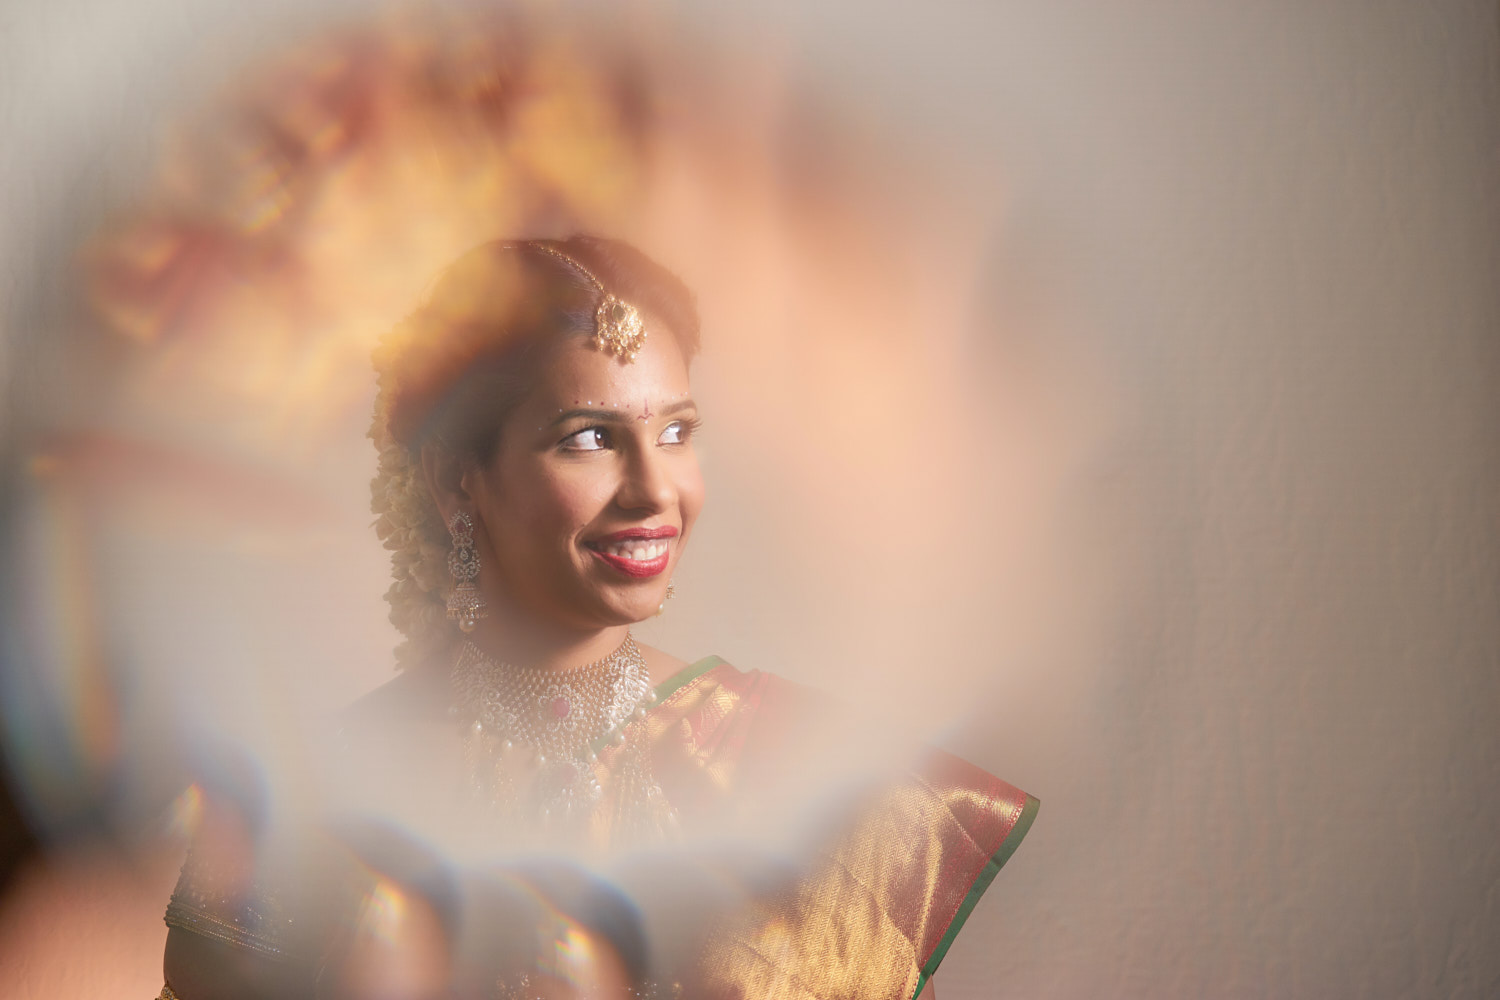 South Indian bride - Portrait Shot using fractal and magbox.